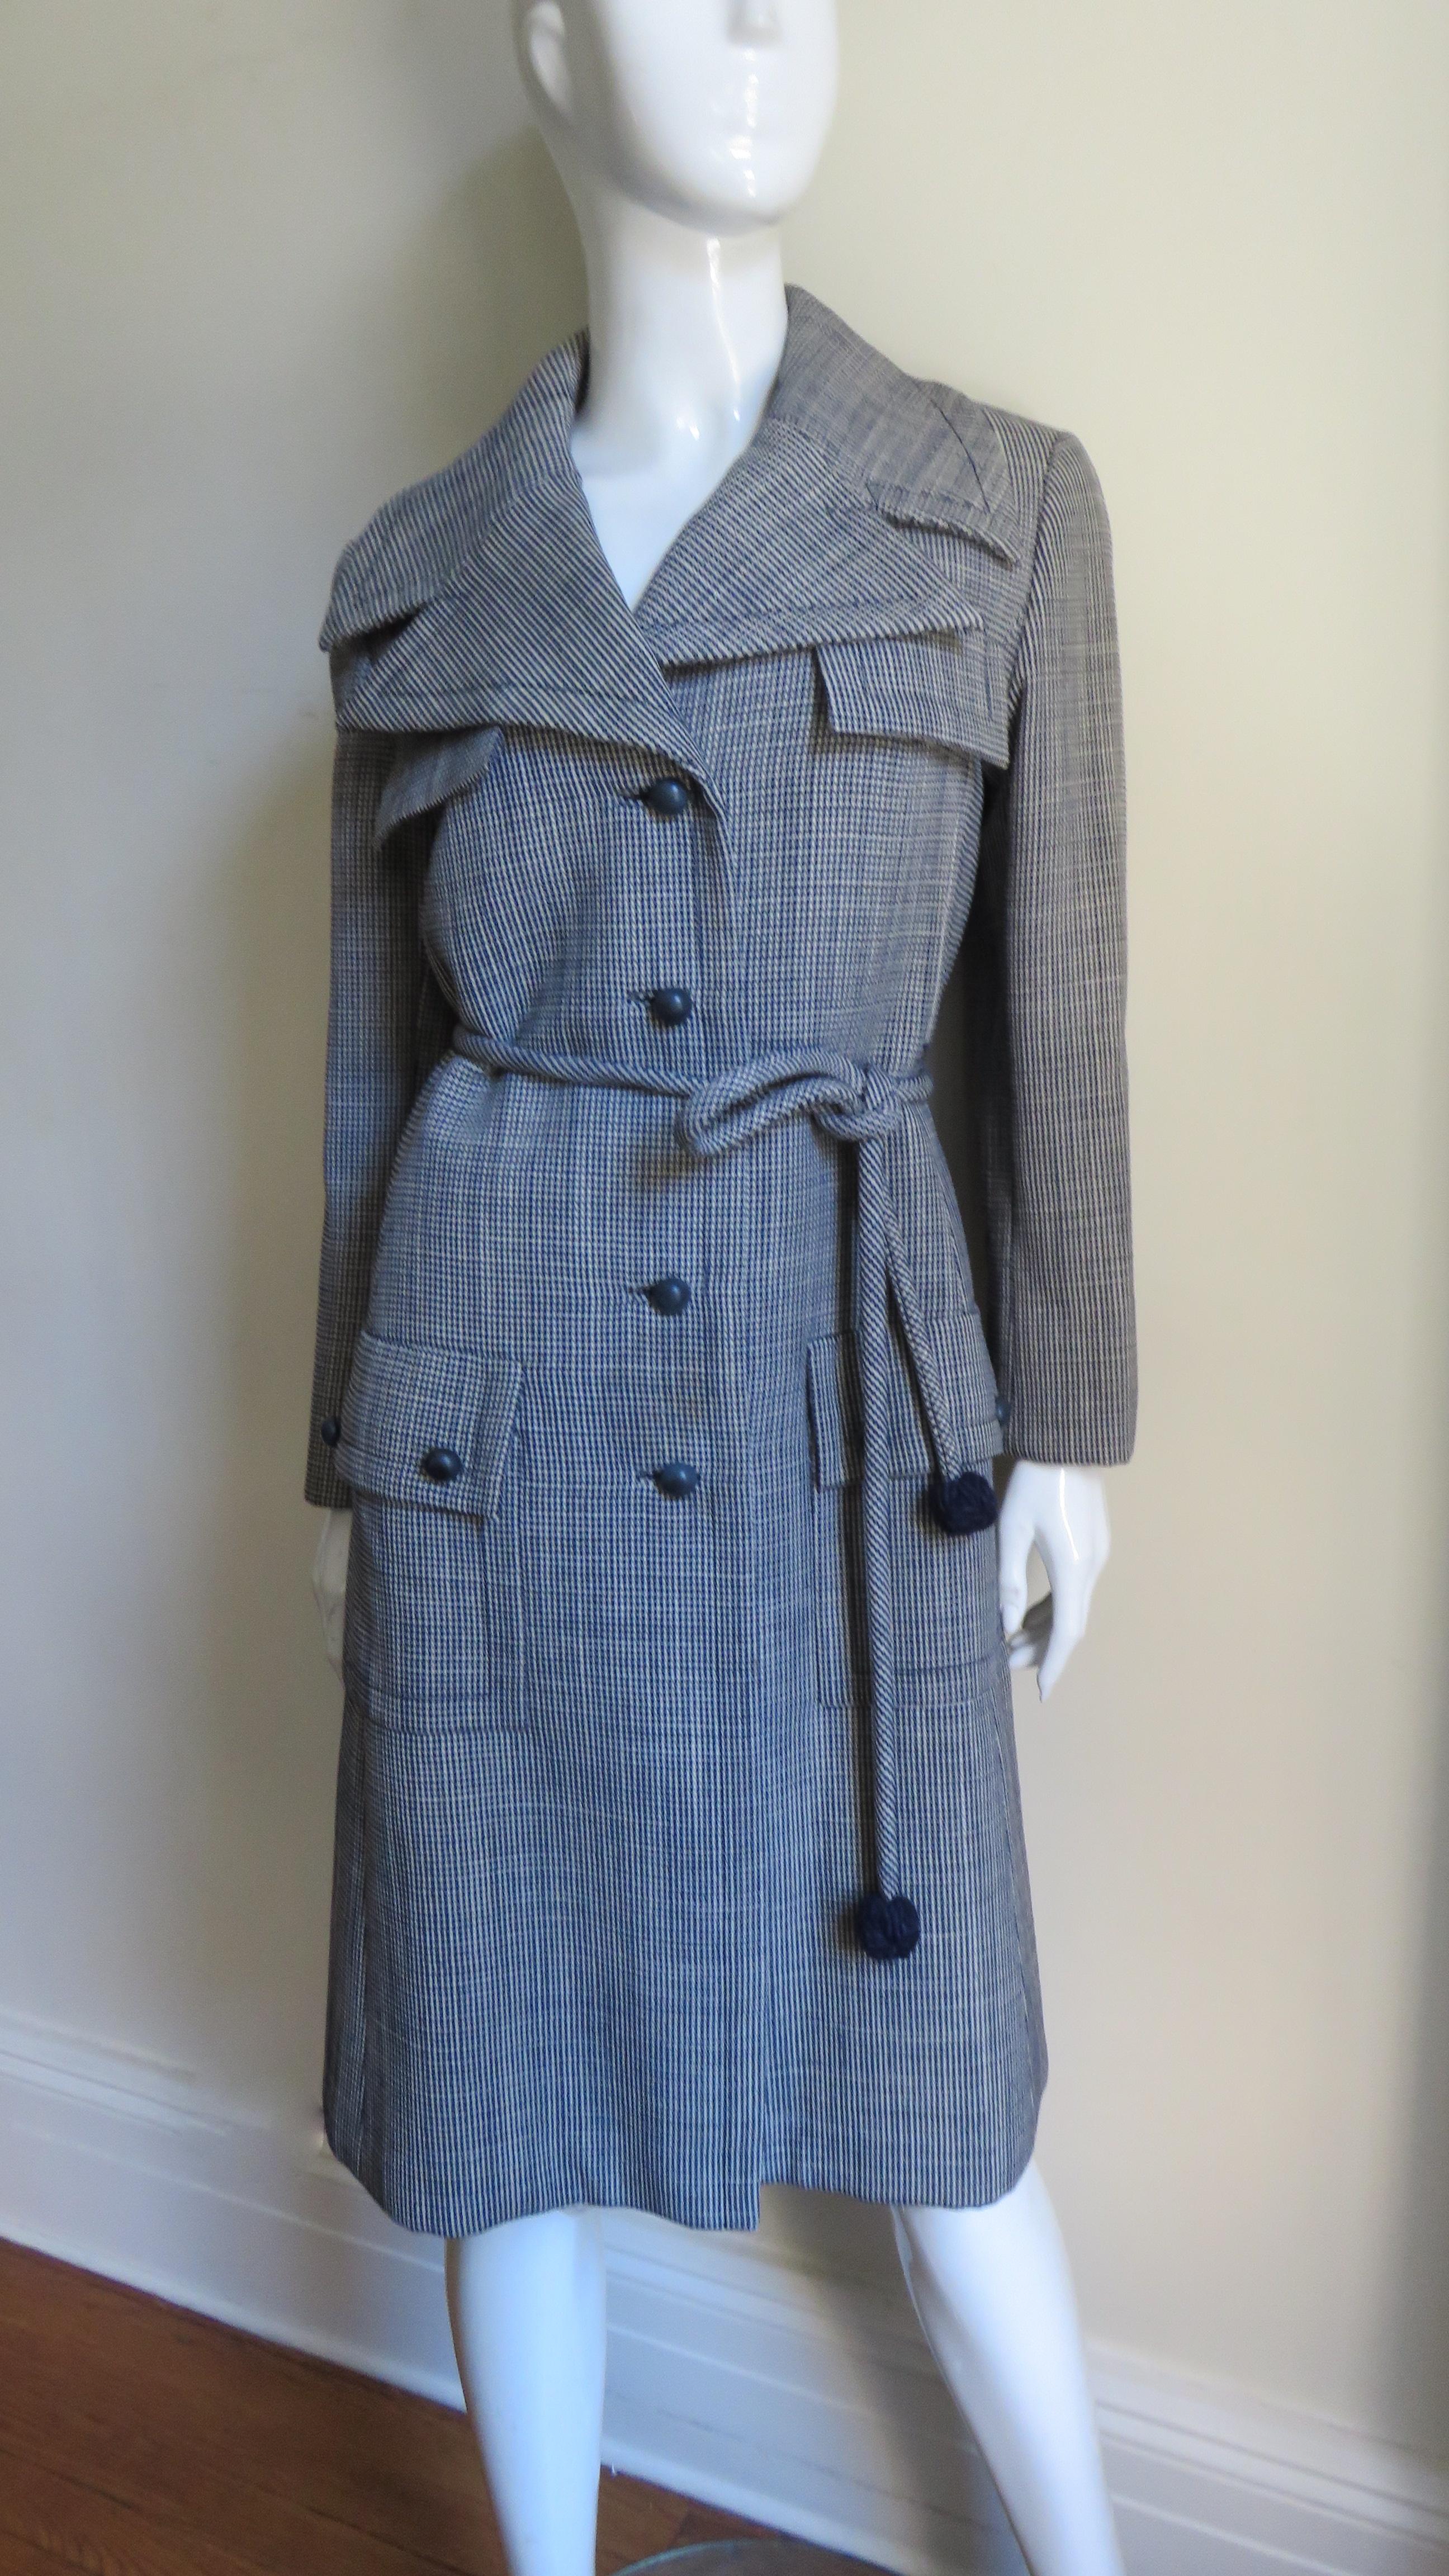 A beautiful off white and navy wool fine hounds tooth print wool coat by Christian Dior.  It has a lapel collar, princess seaming for a great flattering fit and 2 front button flap patch pockets at the hips, 2 at the chest. The coat closes in front